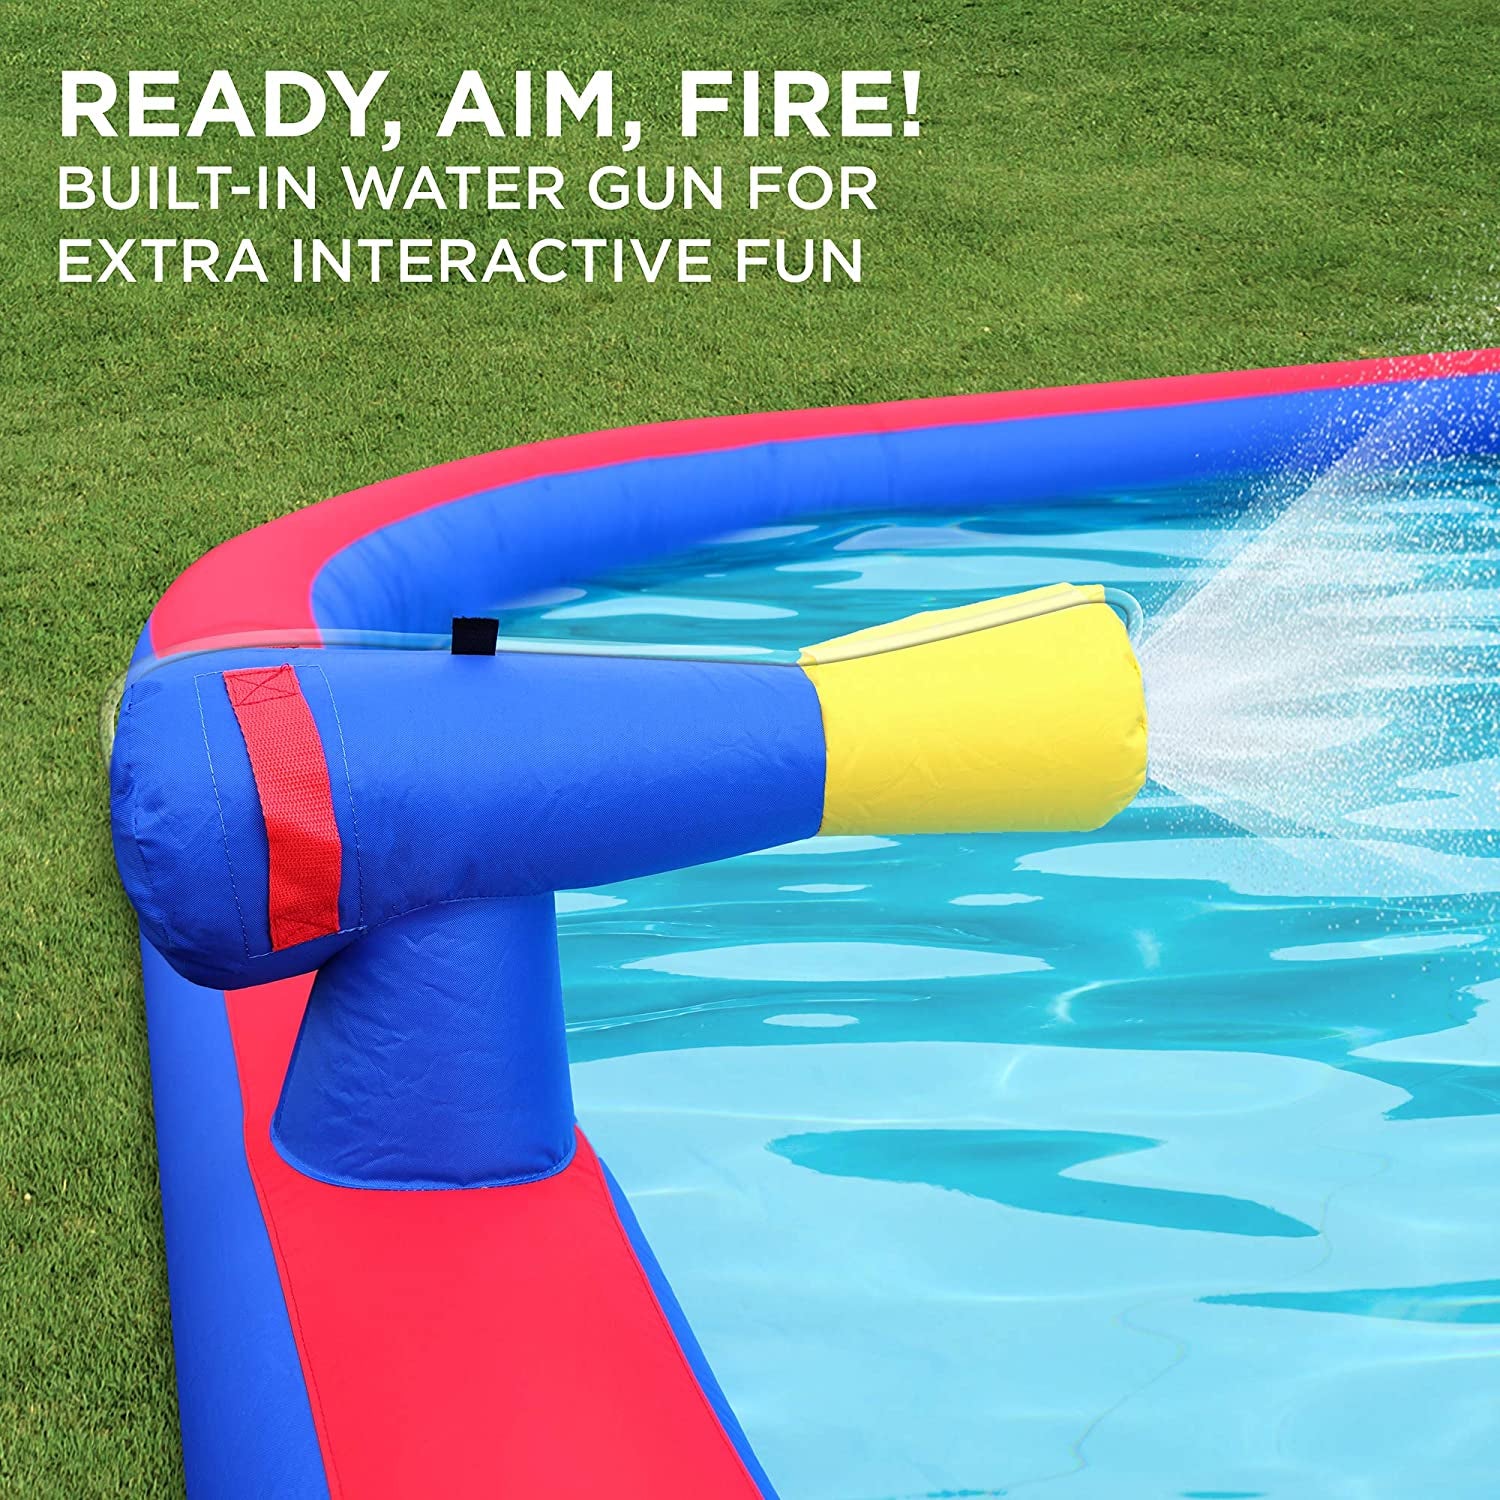 Mega Sport Inflatable Water Triple Slide Park – Heavy-Duty for Outdoor Fun - Climbing Wall, 3 Slides & Splash Pool – Easy to Set up & Inflate with Included Air Pump & Carrying Case